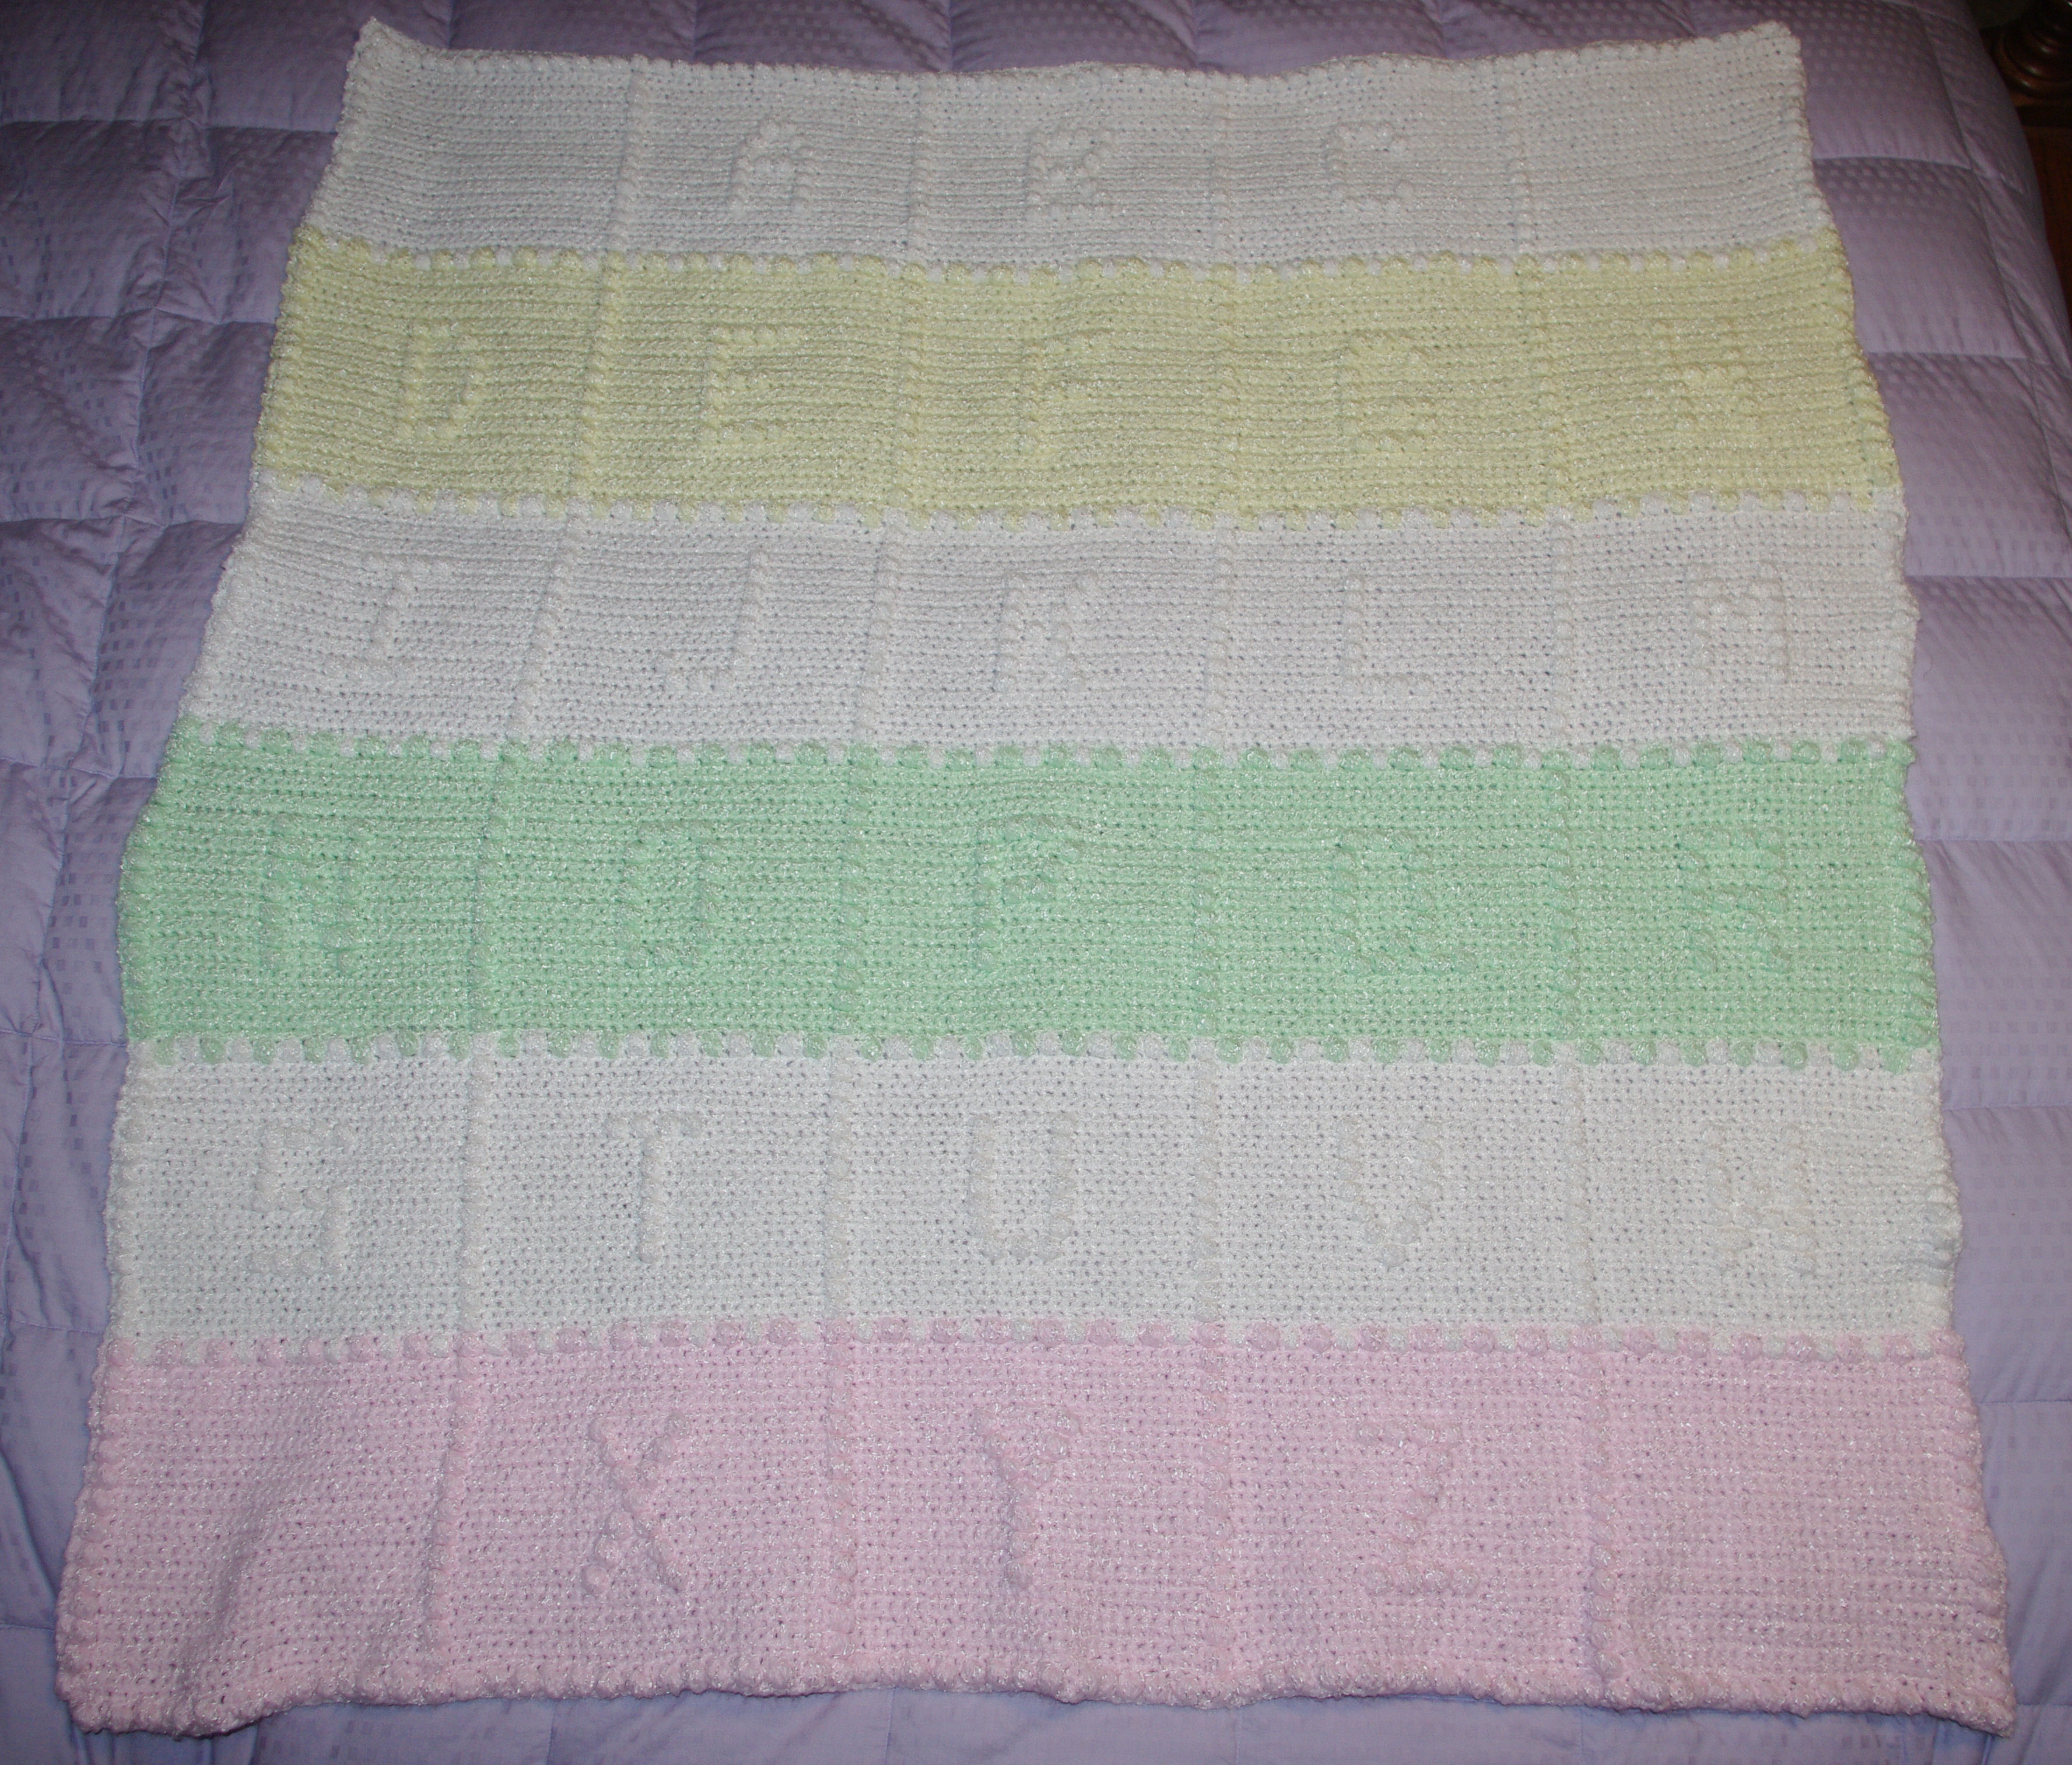 Knitting Patterns For Baby Blankets Free Bas Abcs Ba Afghan Crochet Pattern Free Crochet Pattern